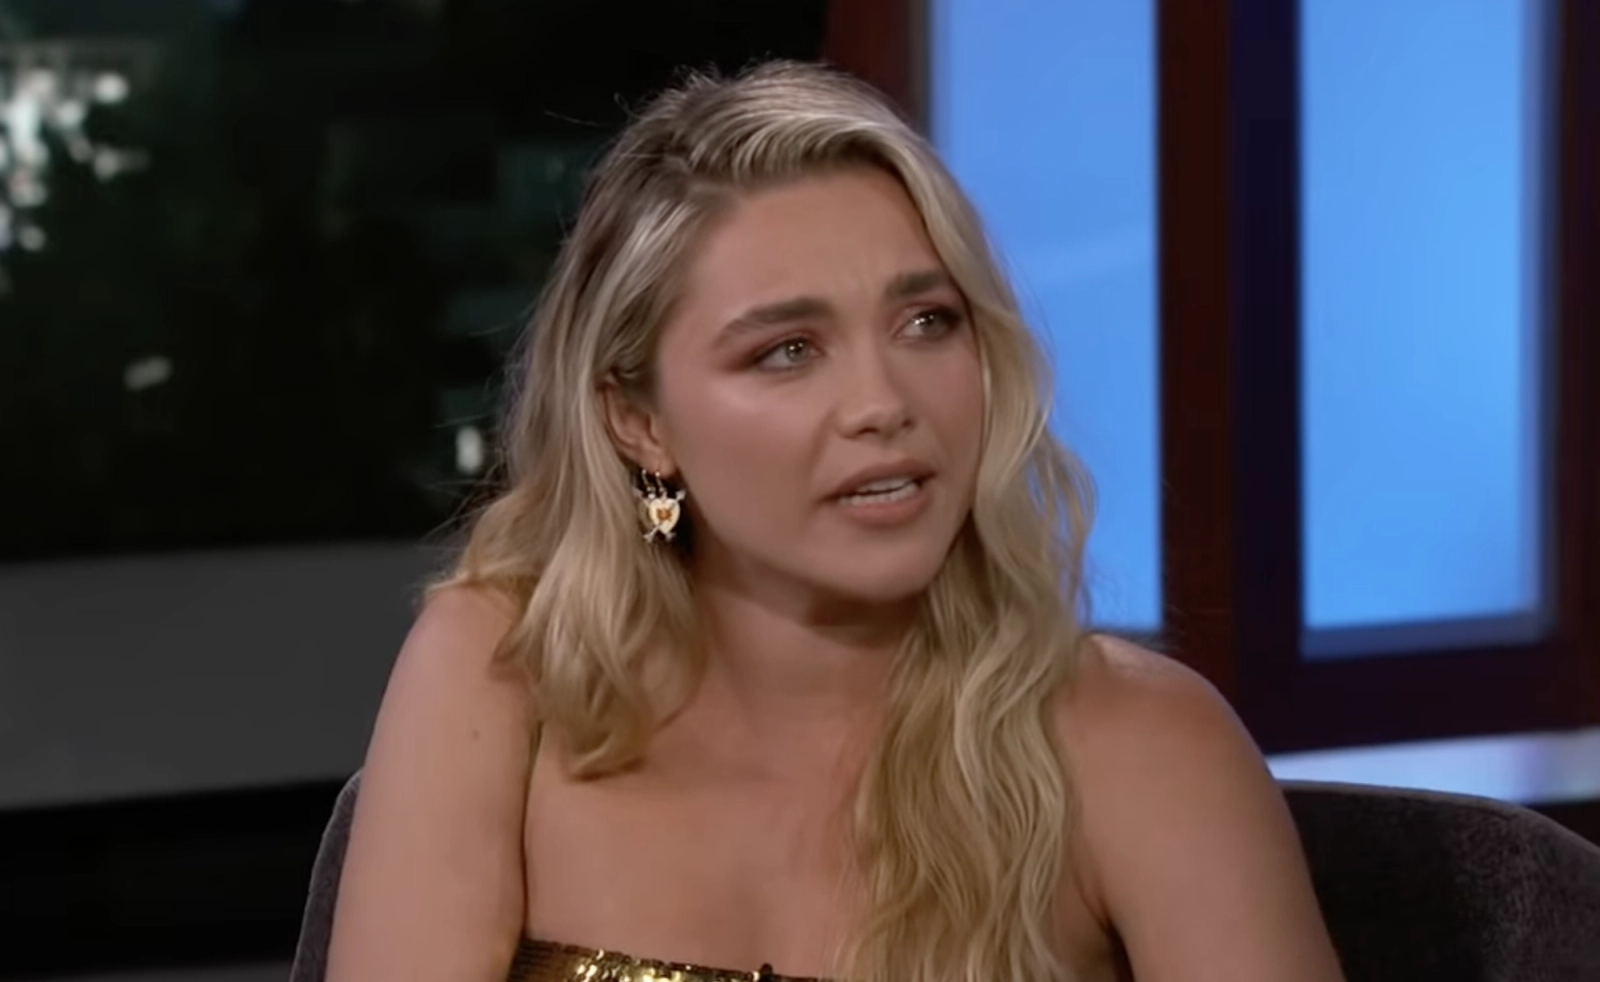 florence-pugh-refuses-to-promote-olivia-wildes-dont-worry-darling-movie-harry-styles-reportedly-caused-the-rift-between-two-actresses